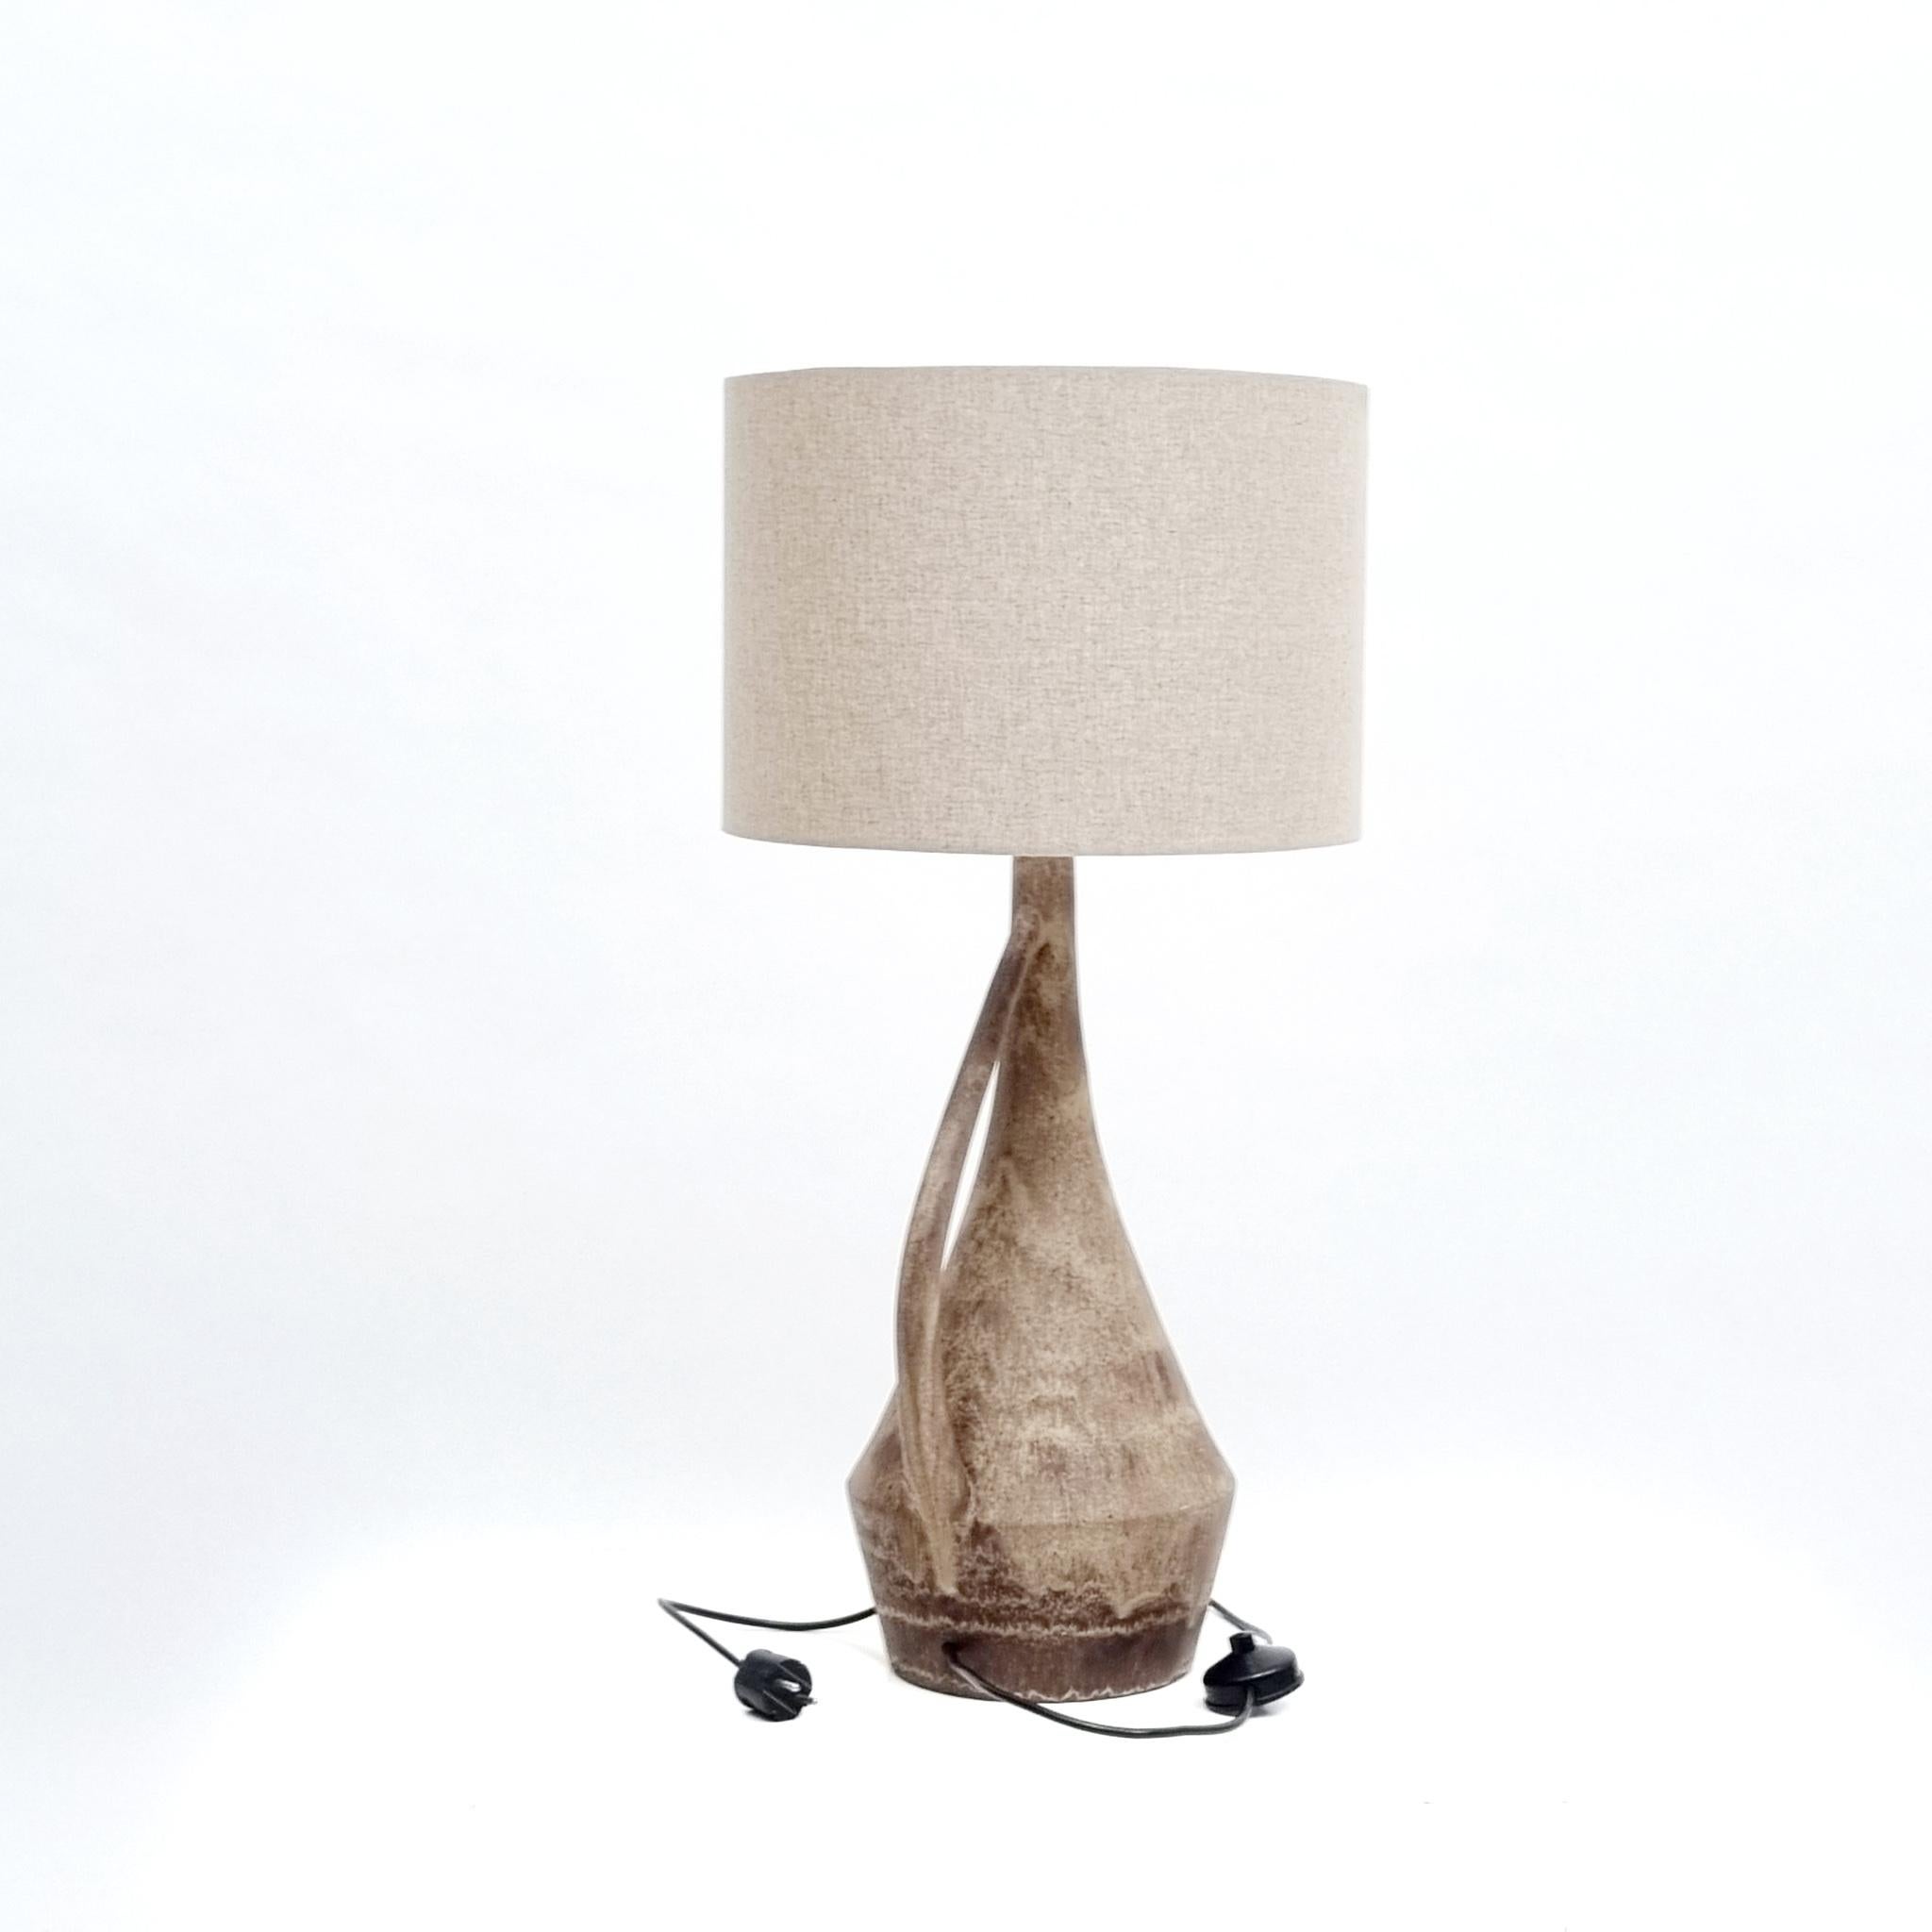 Large French Midcentury ceramic table lamp in the Brutalist style.